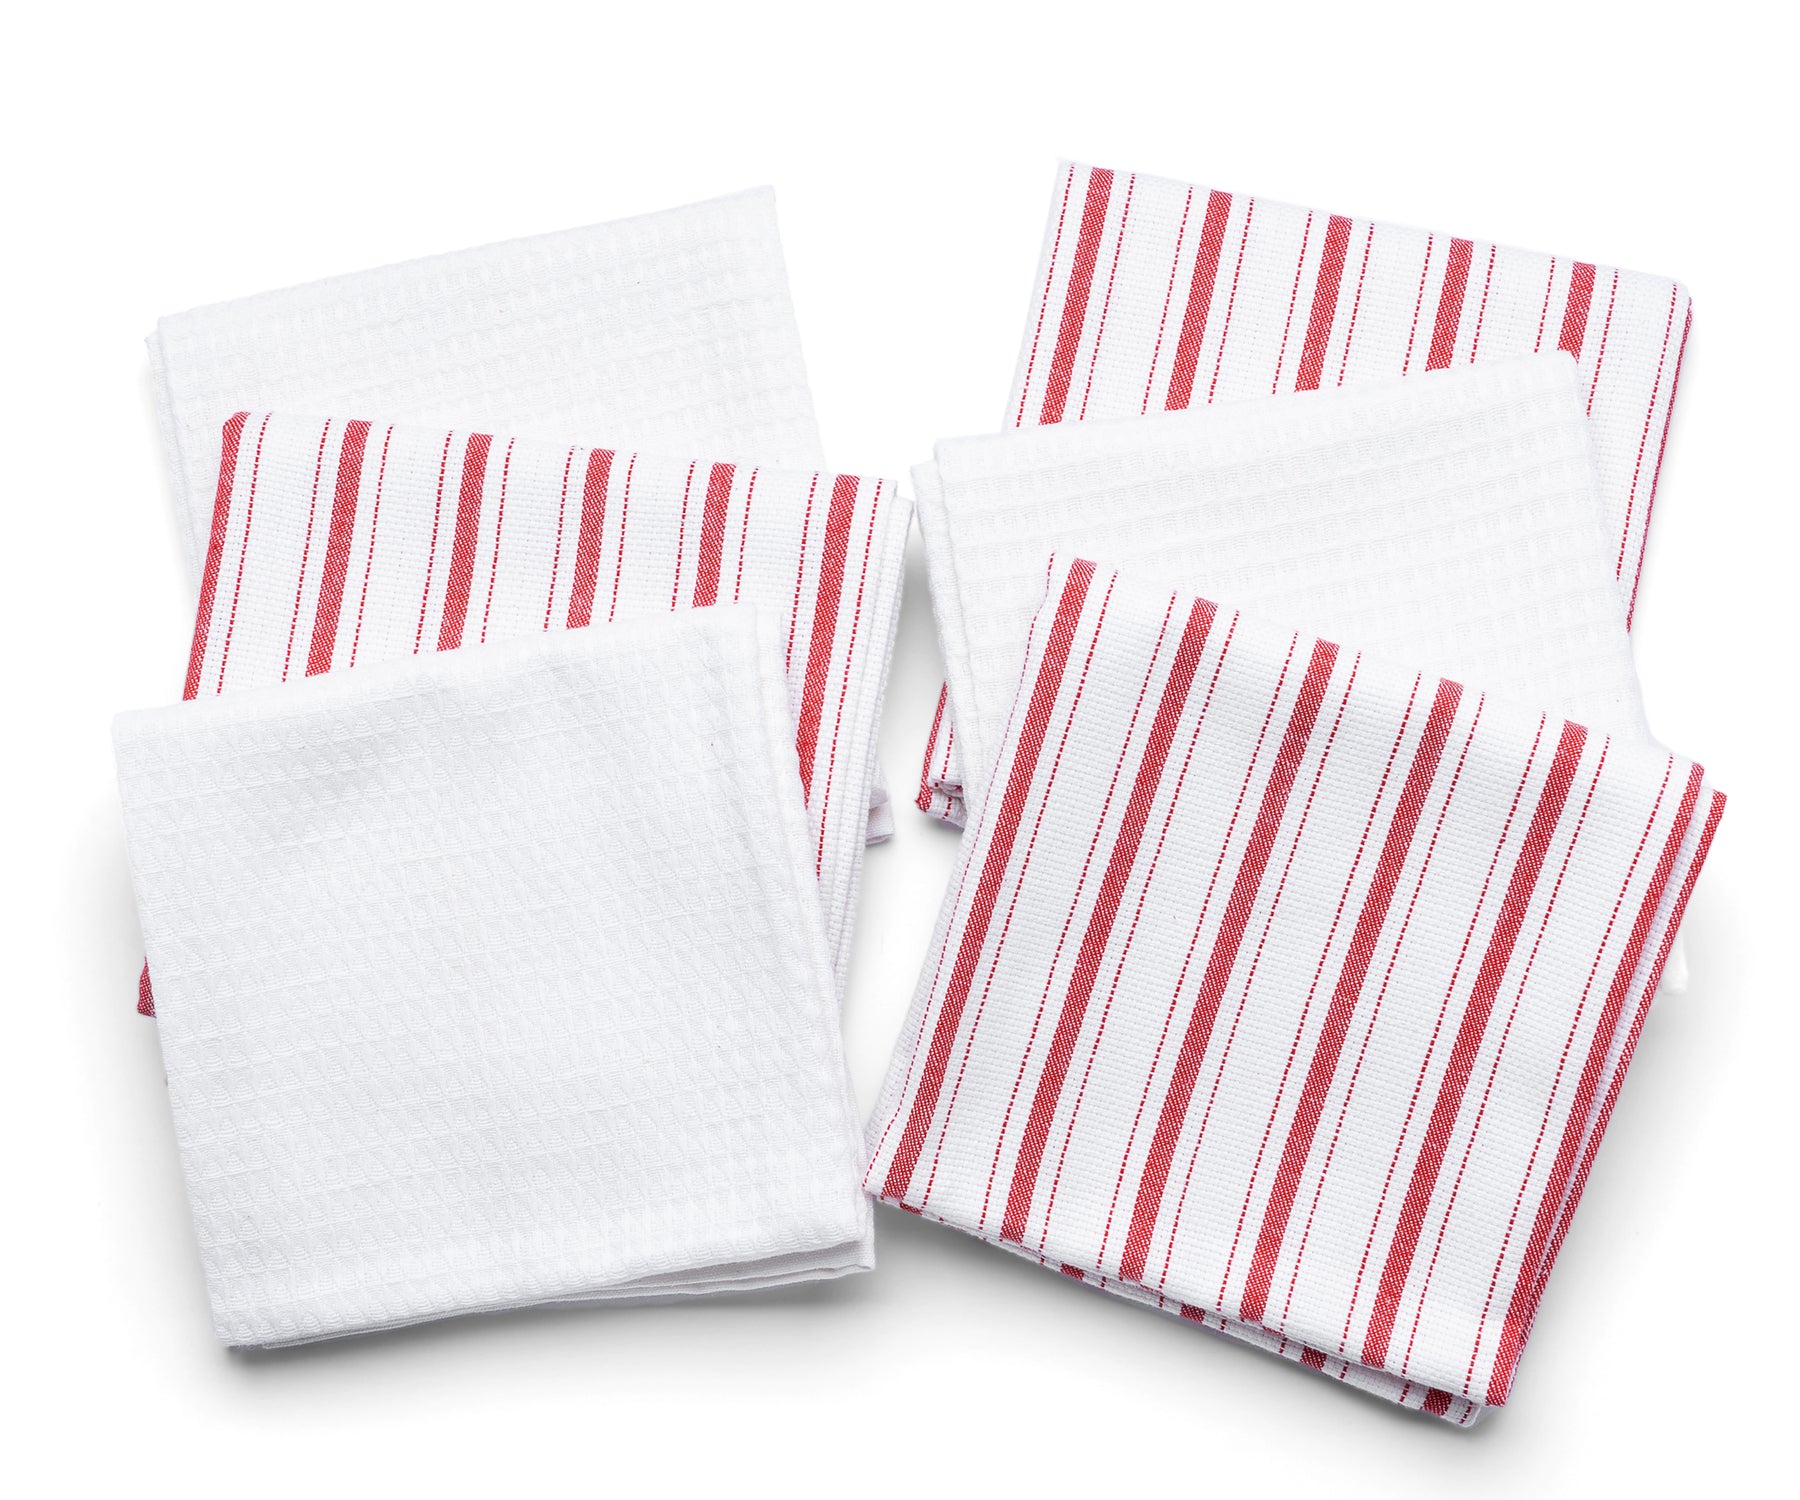 Dish towels set of 6, Red and white striped dish towels cotton, drying dish towels or hand towels for kitchen